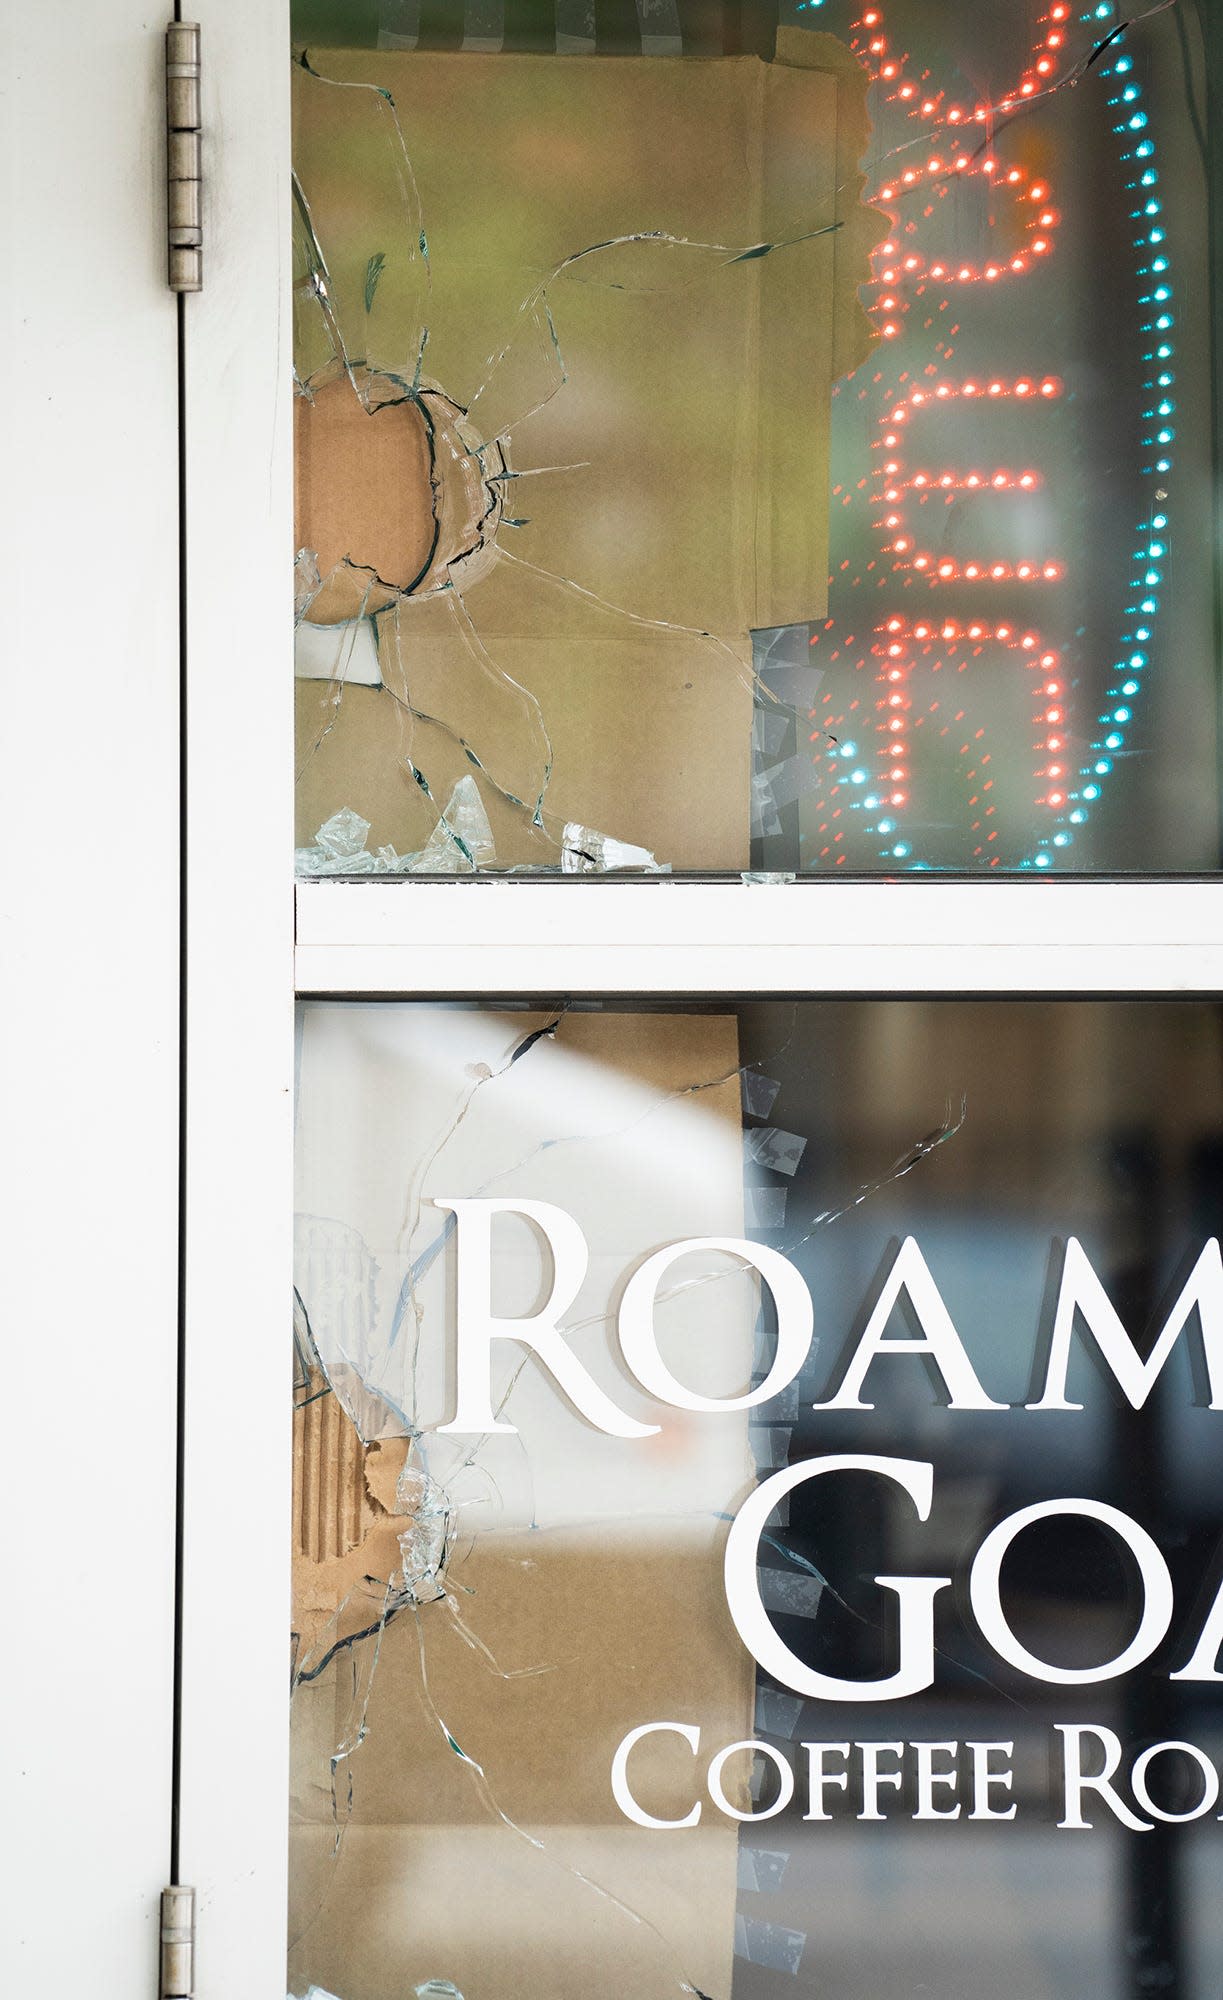 Broken windows at Roaming Goat Coffee Roasters from the May 5 shootings in the Short North. In a city plagued by gun violence, the Short North neighborhood — known for its art galleries and eclectic night life — has been no exception.